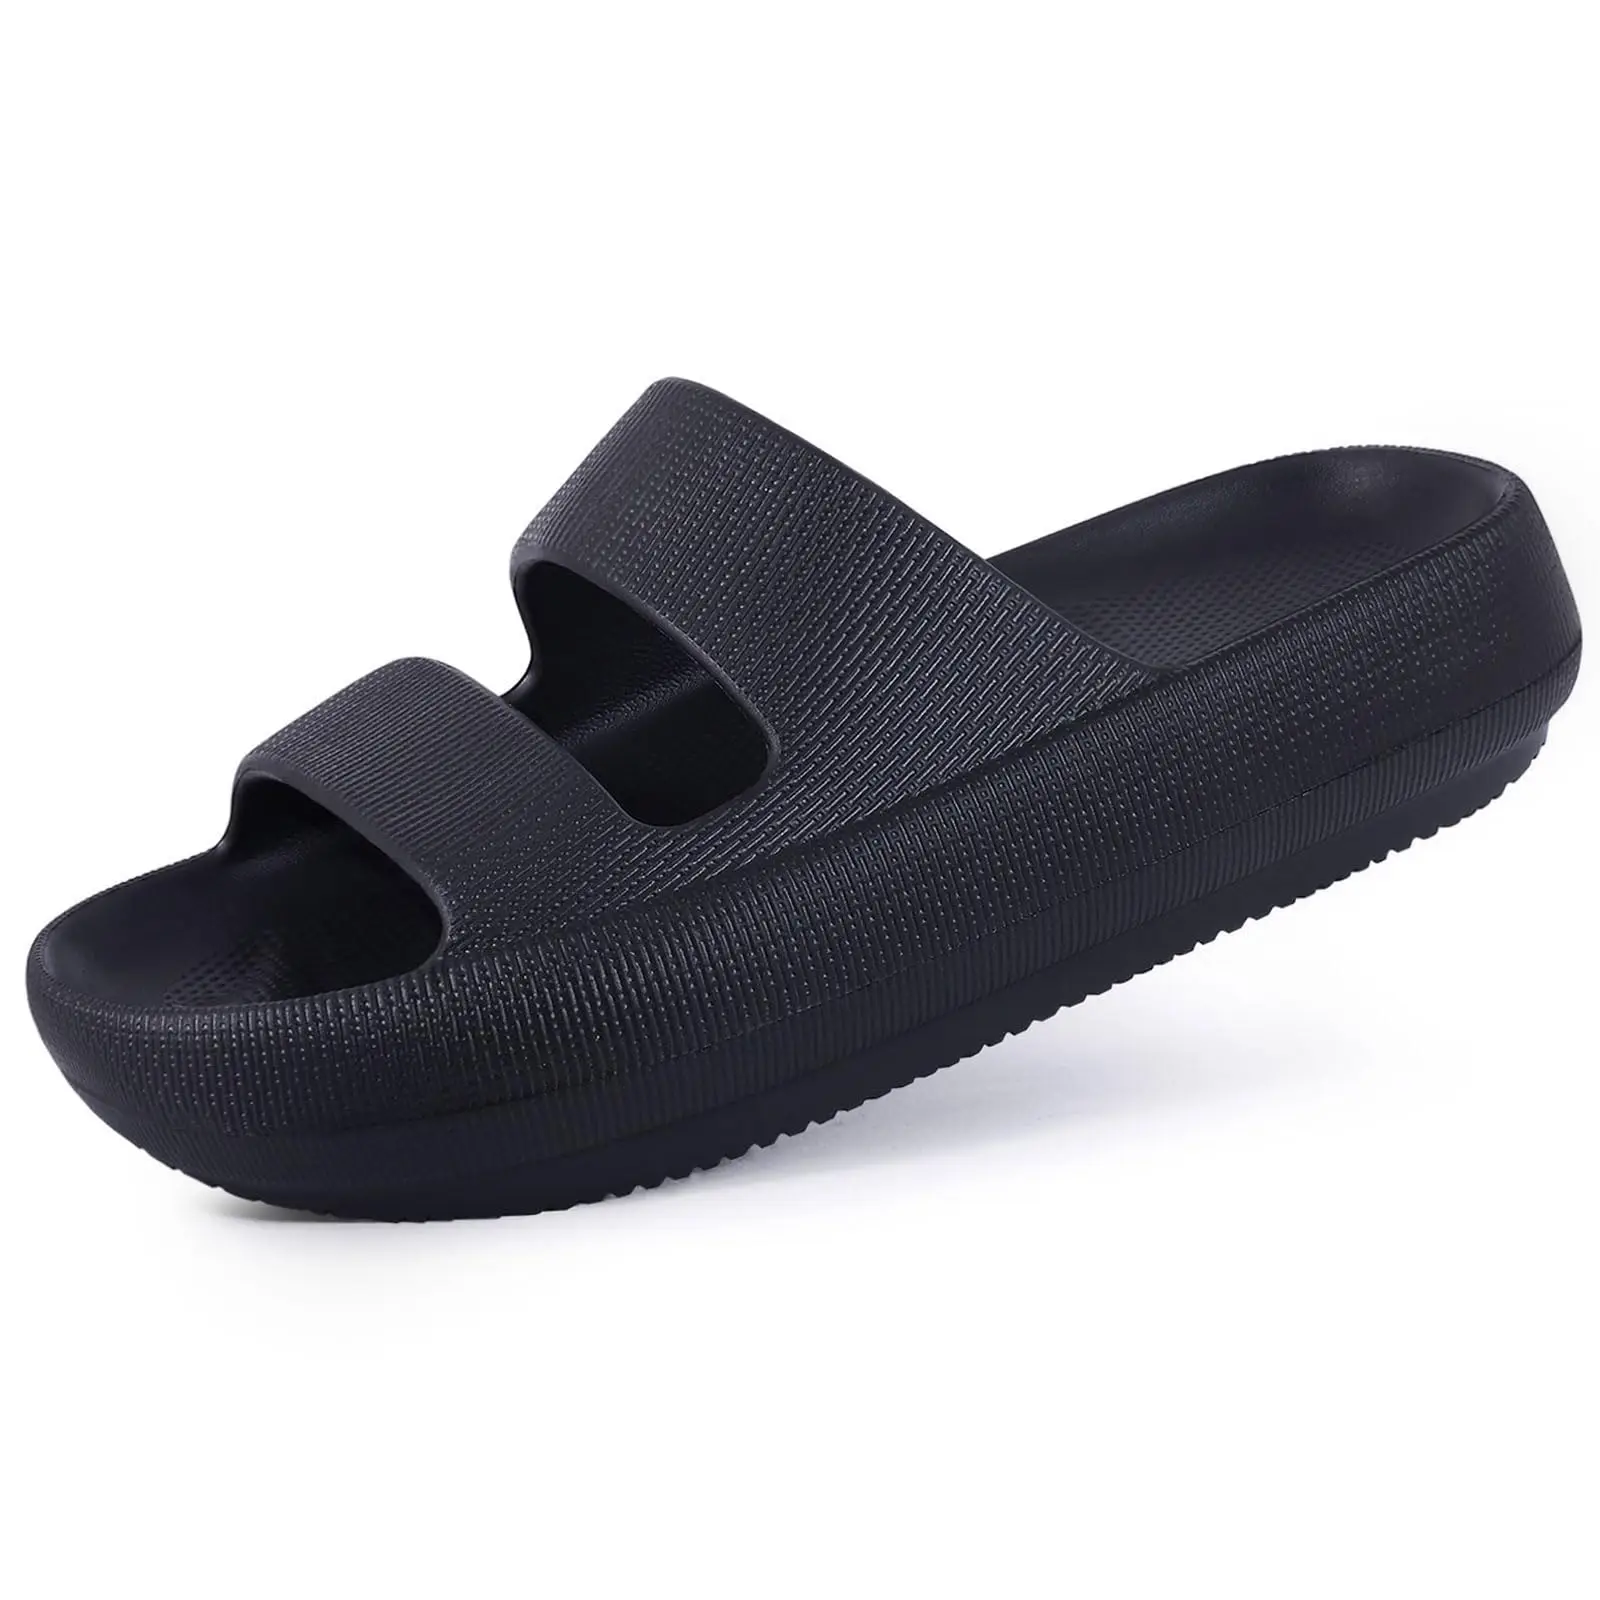 

Pallene Fashion Thick Bottom Slippers Women Summer Soft Cloud Slippers With Arch Support Beach Shoes Sandals Home Bathroom Slide